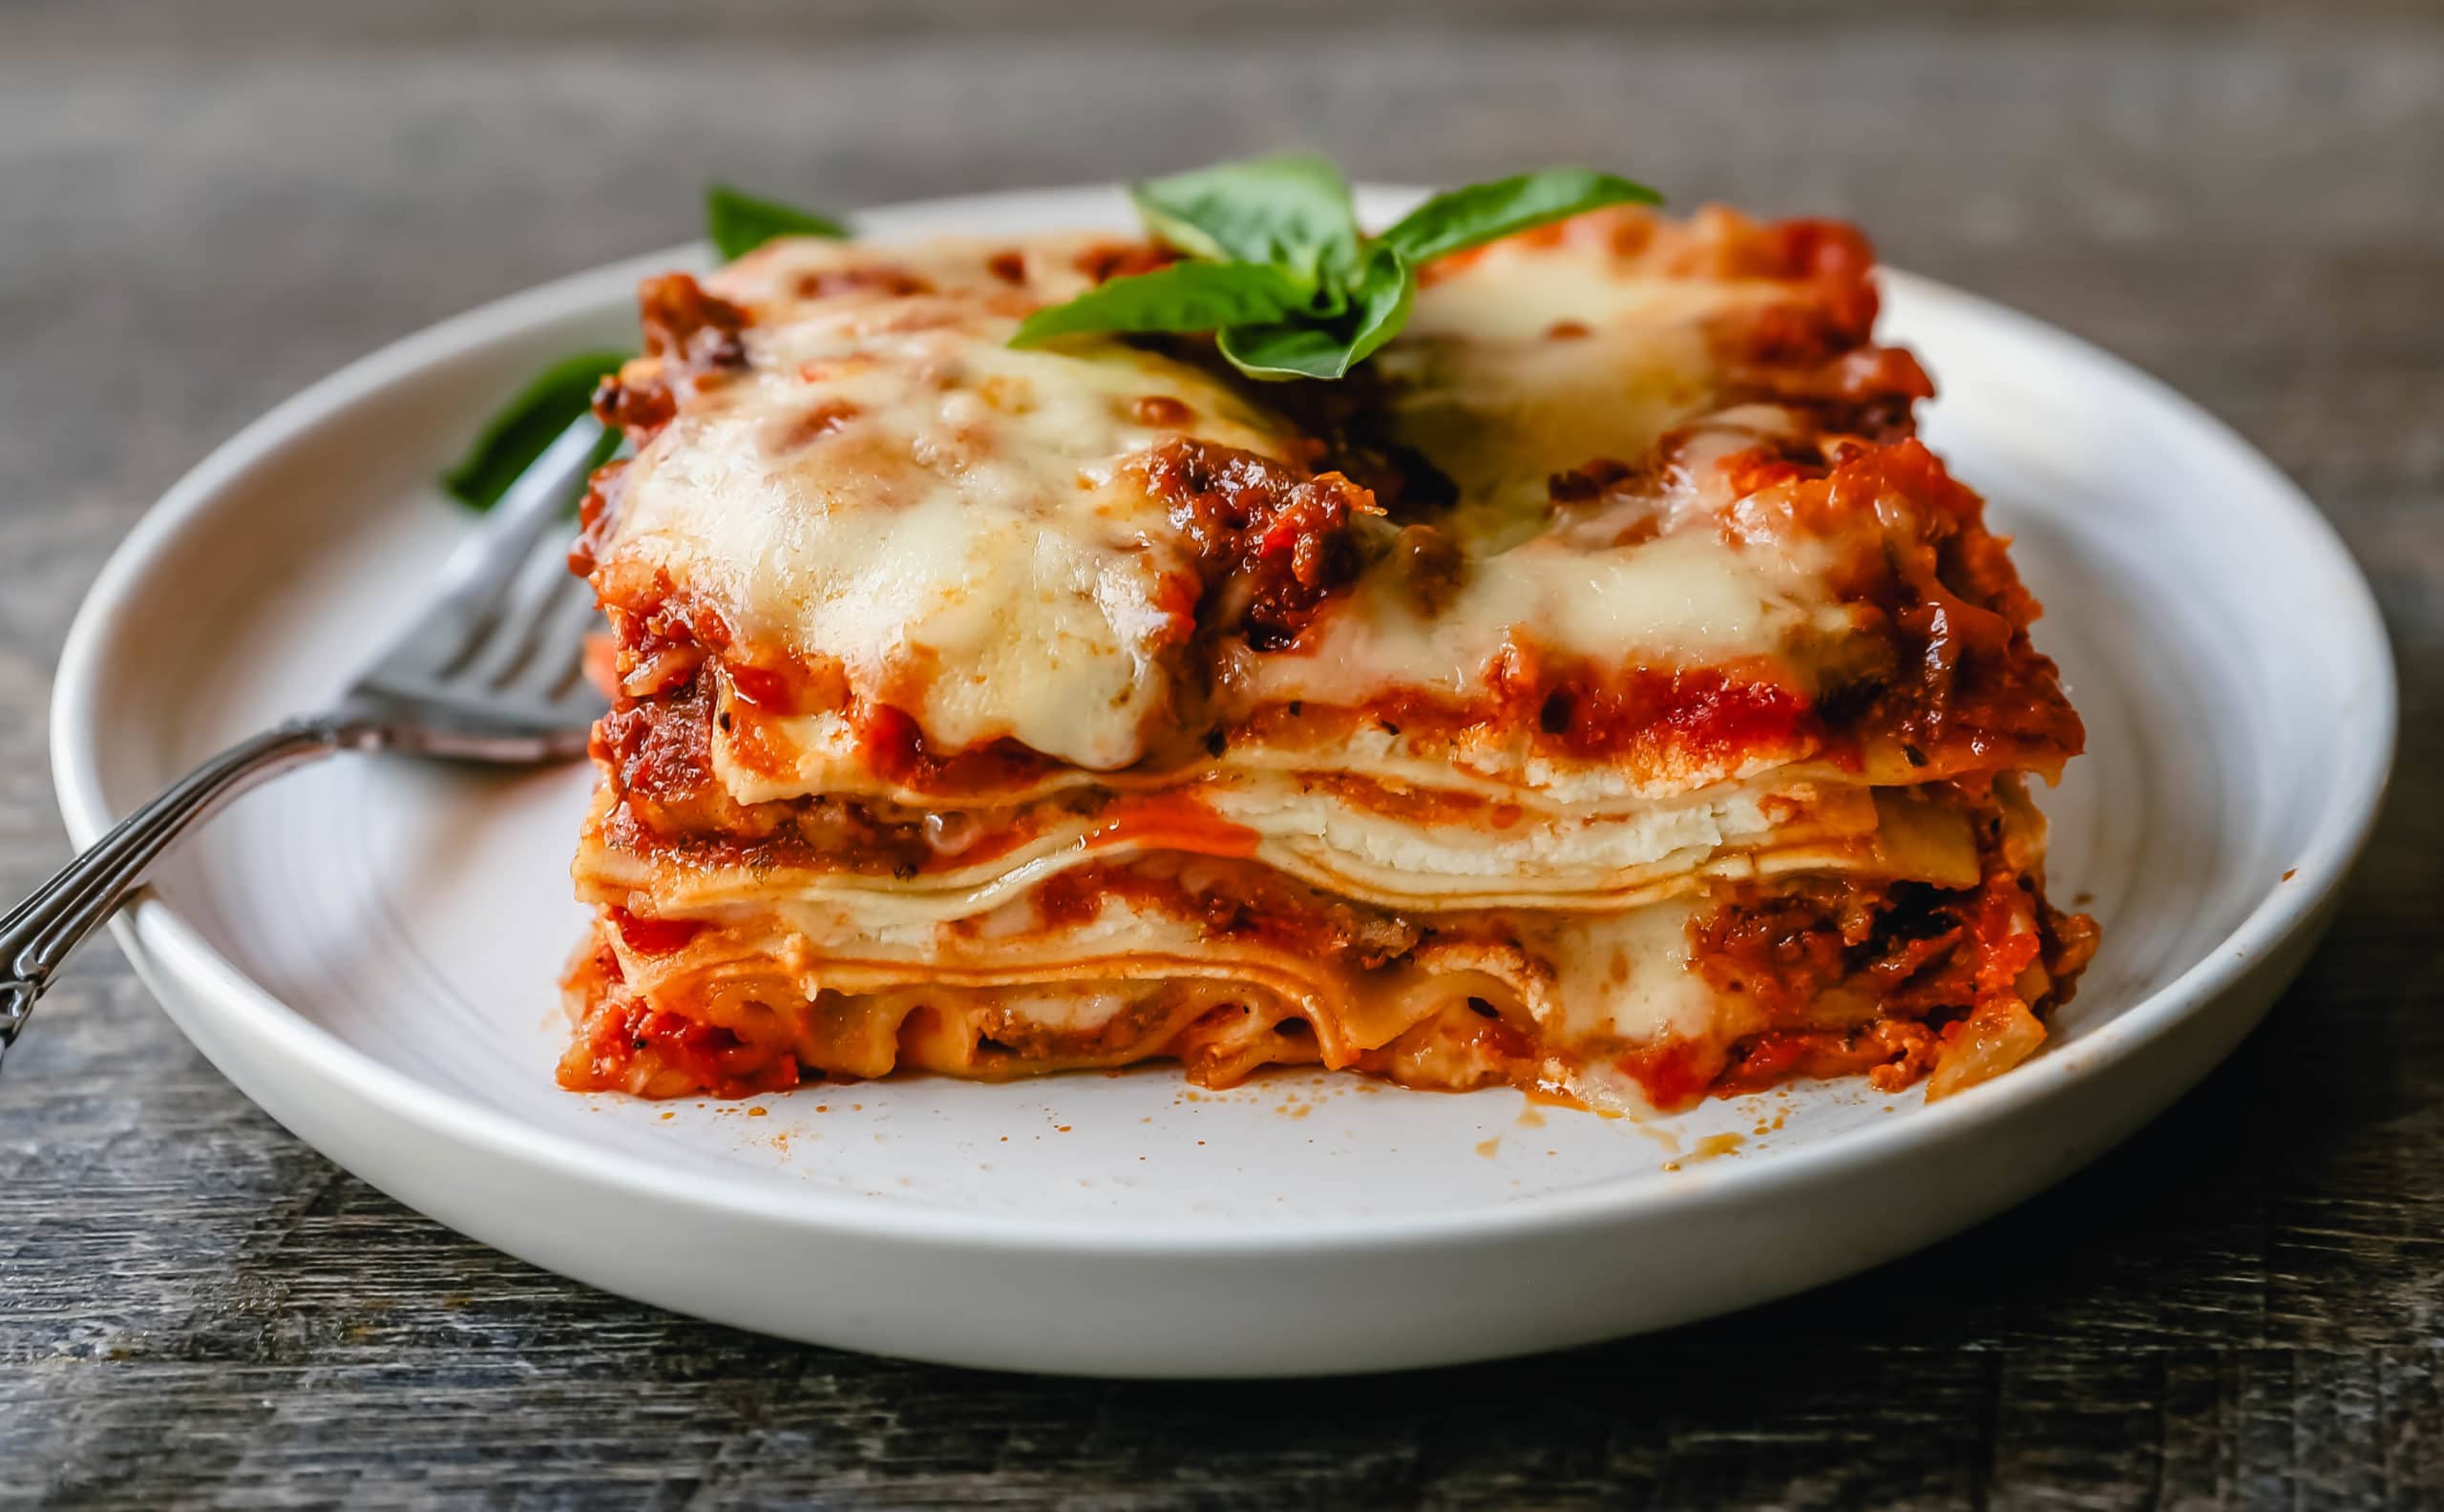 The Best Classic Lasagna Recipe The perfect lasagna recipe made with parmesan ricotta cheese filling, melted mozzarella cheese, lasagna noodles, and a robust tomato meat sauce. It is the best lasagna recipe!